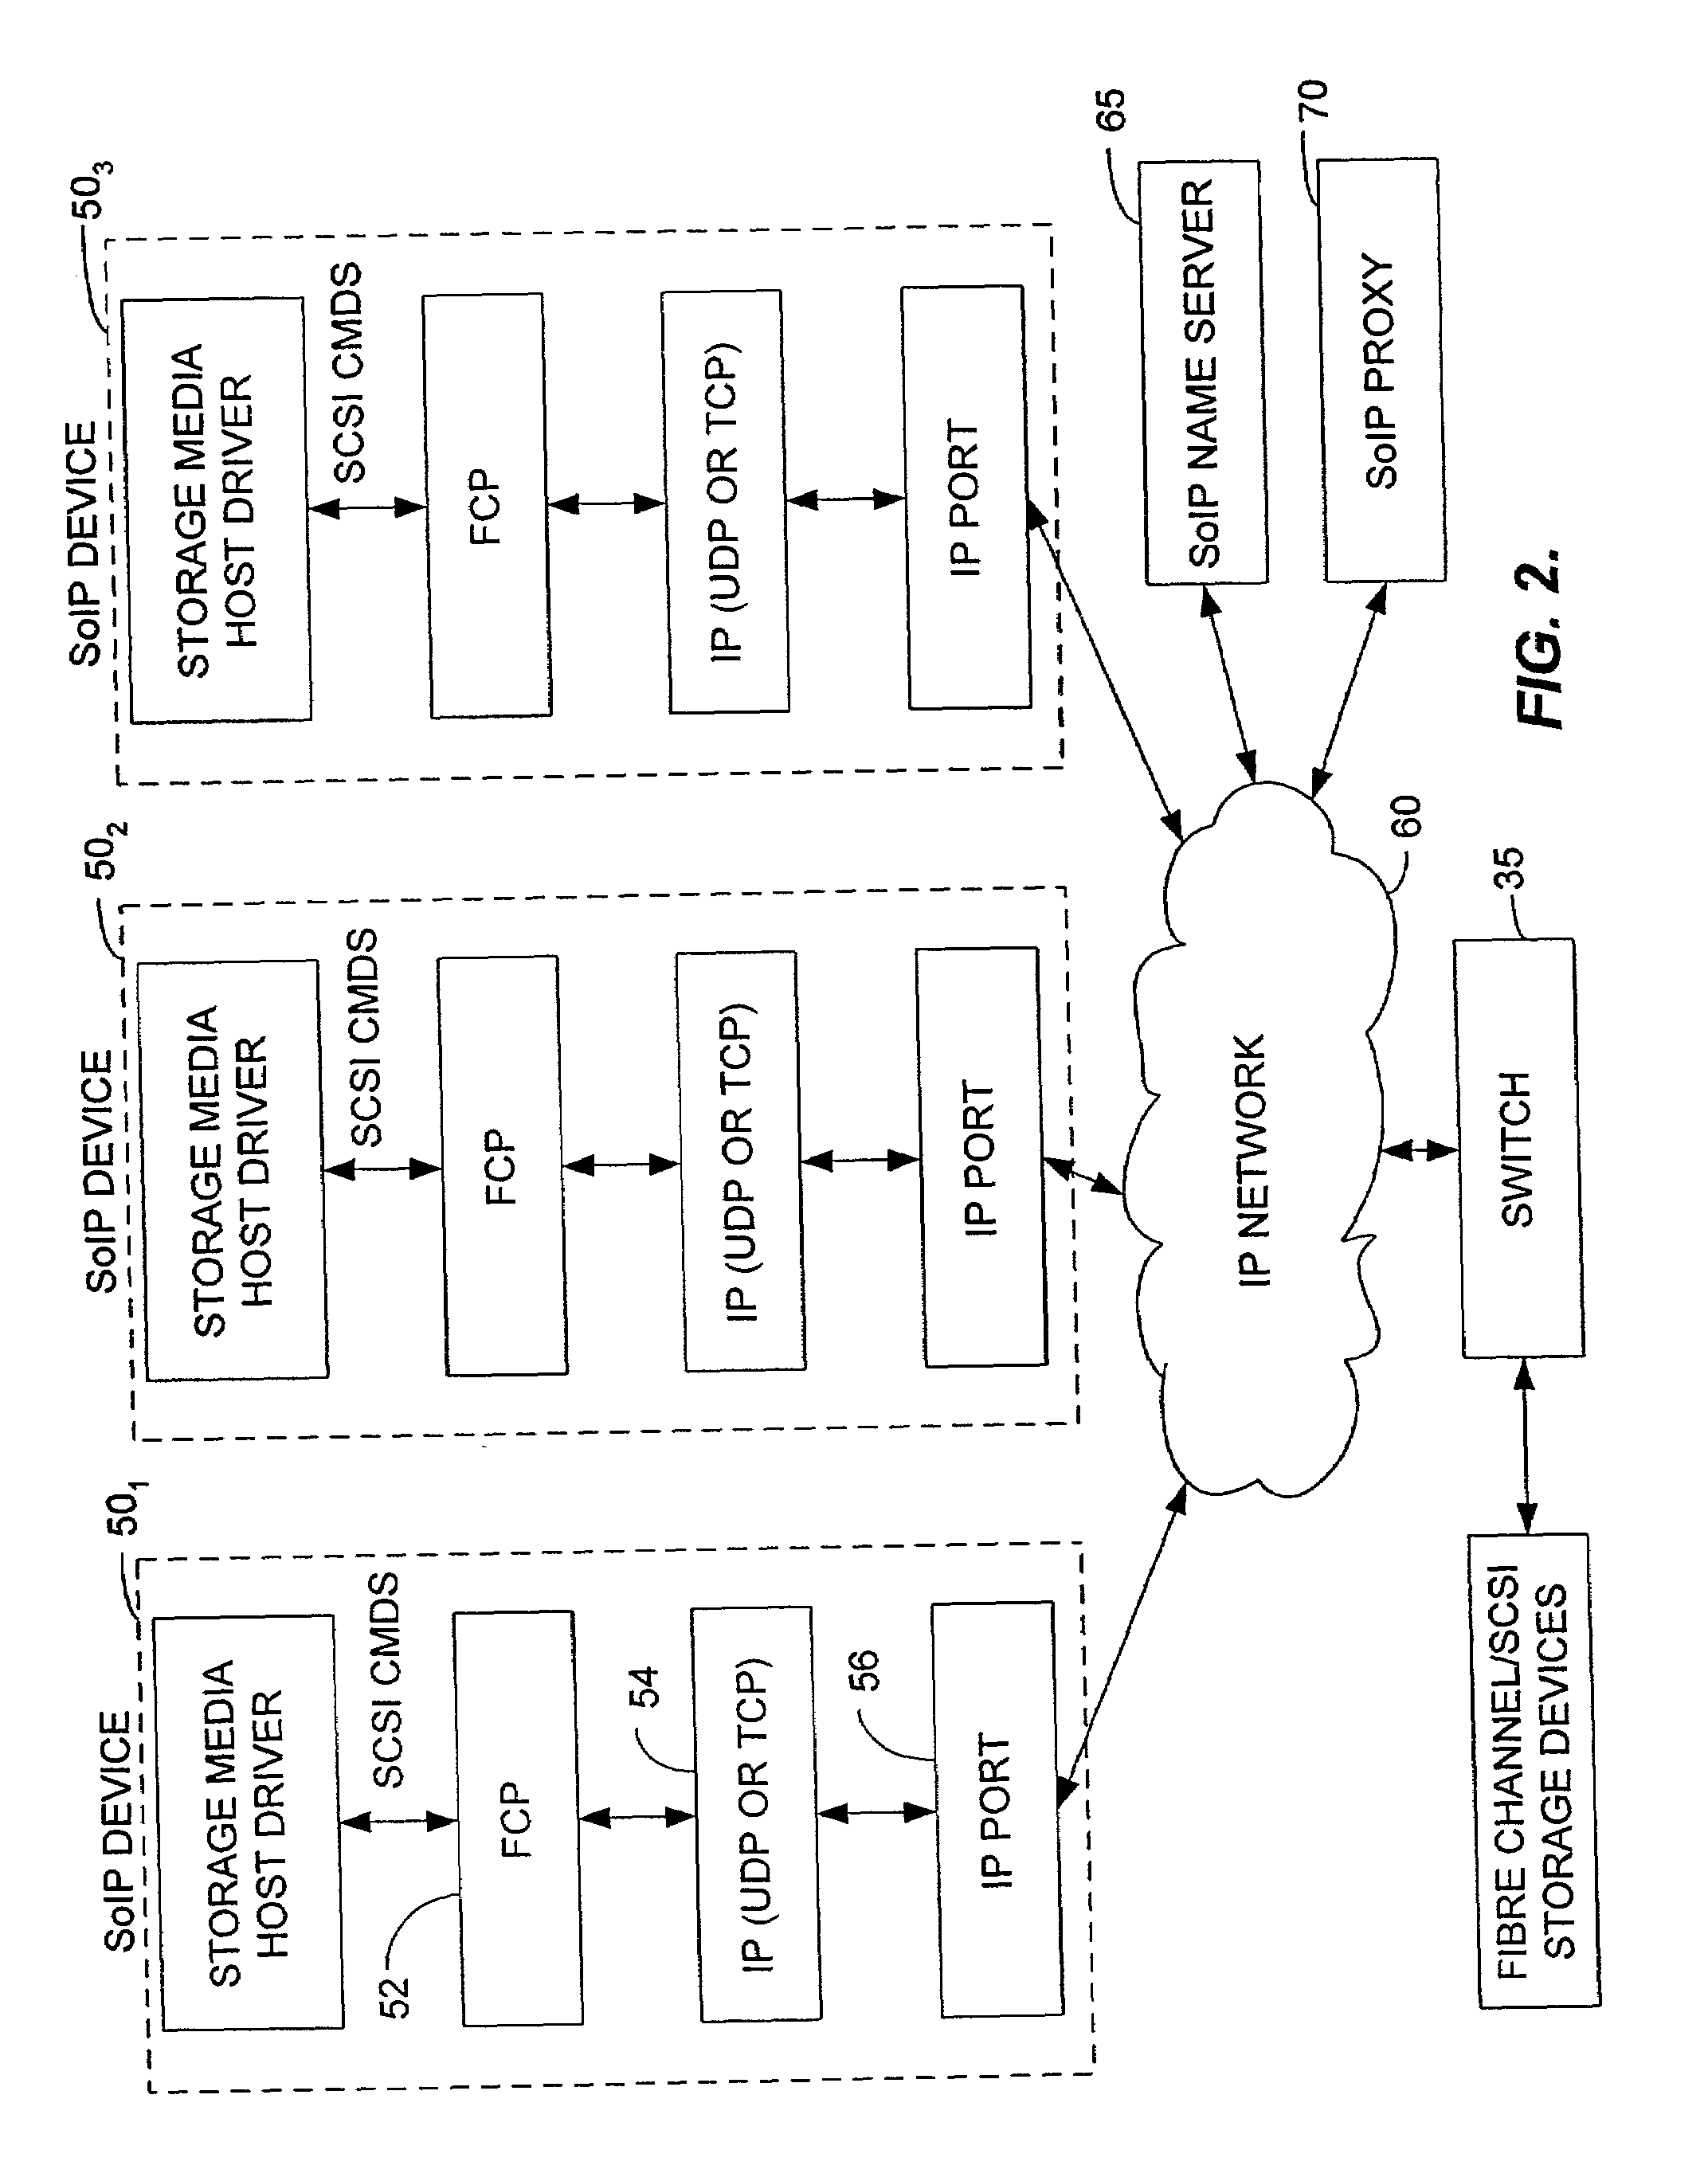 Method and apparatus for transferring data between IP network devices and SCSI and fibre channel devices over an IP network